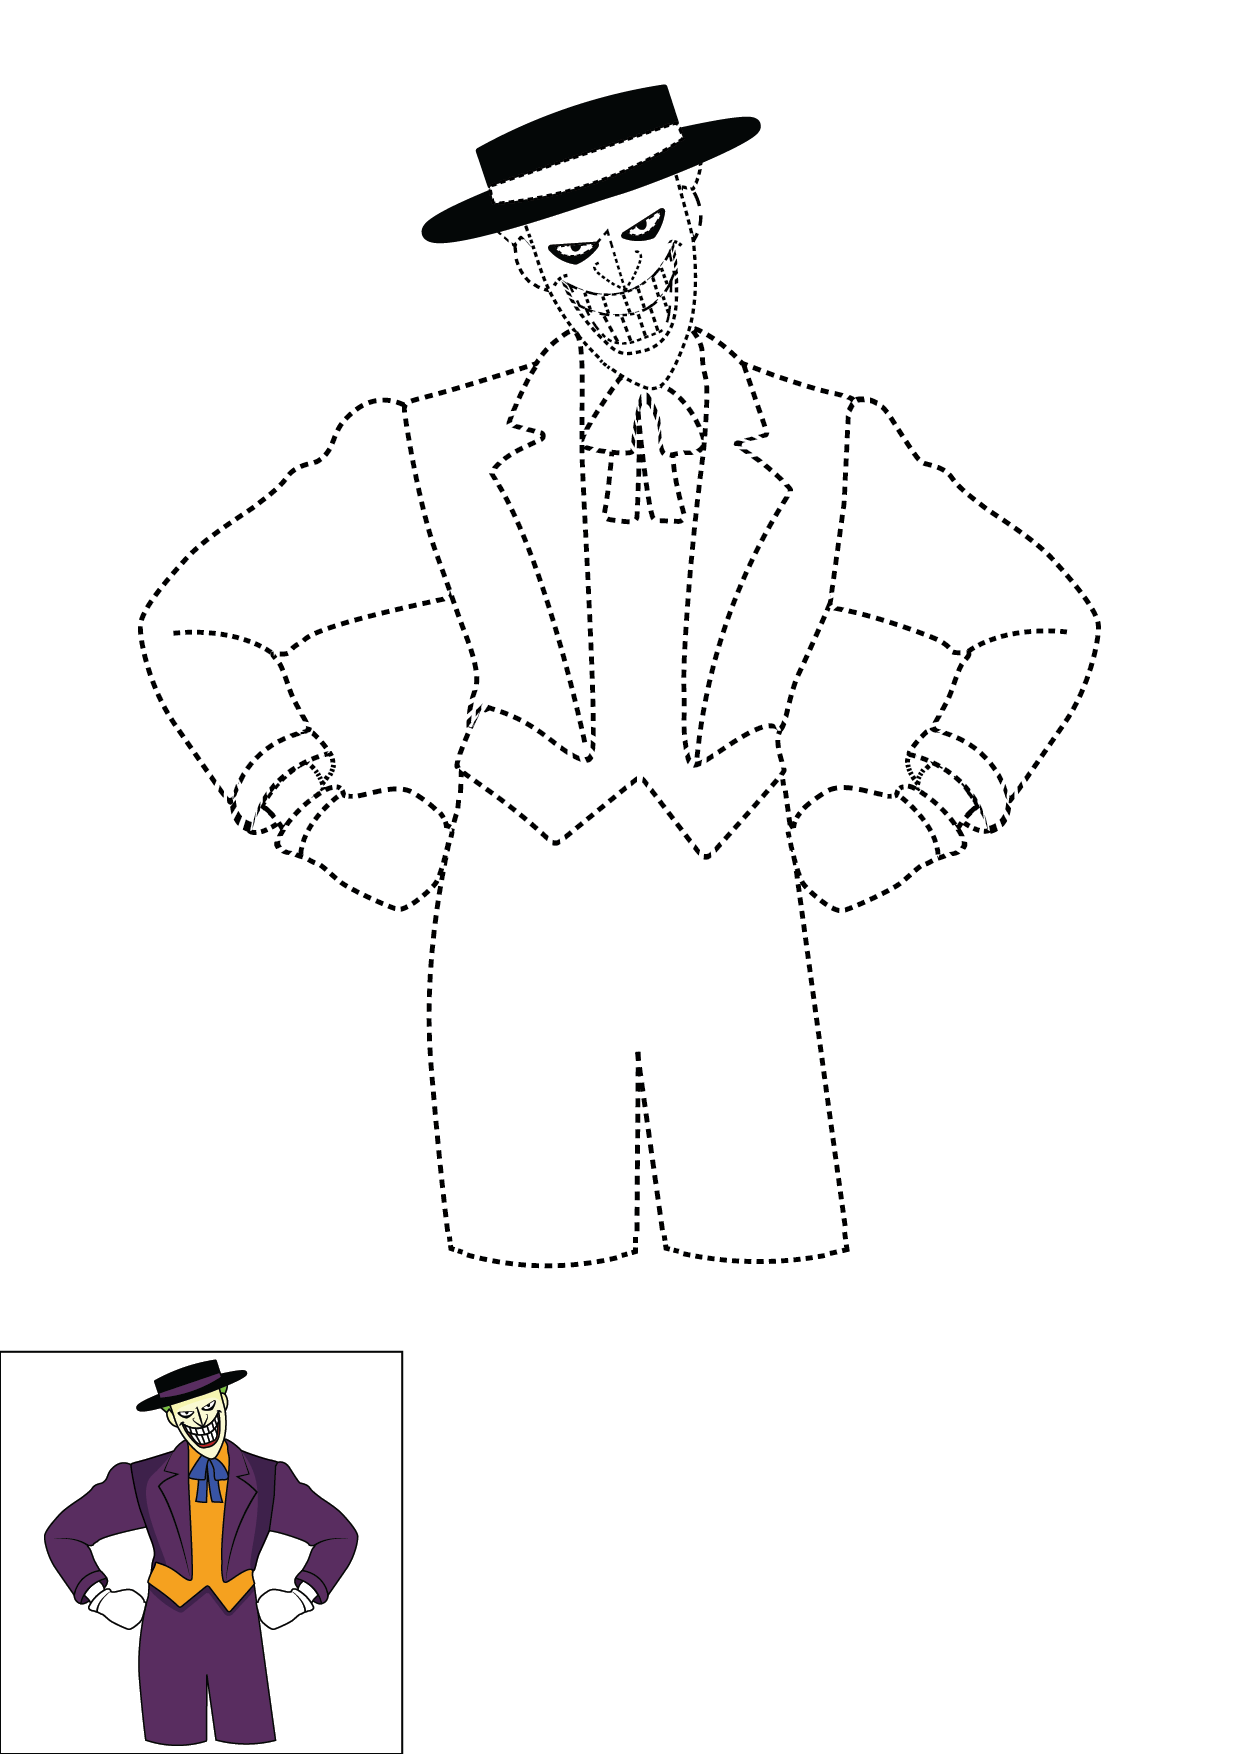 How to Draw The Joker Cartoon Step by Step Printable Dotted